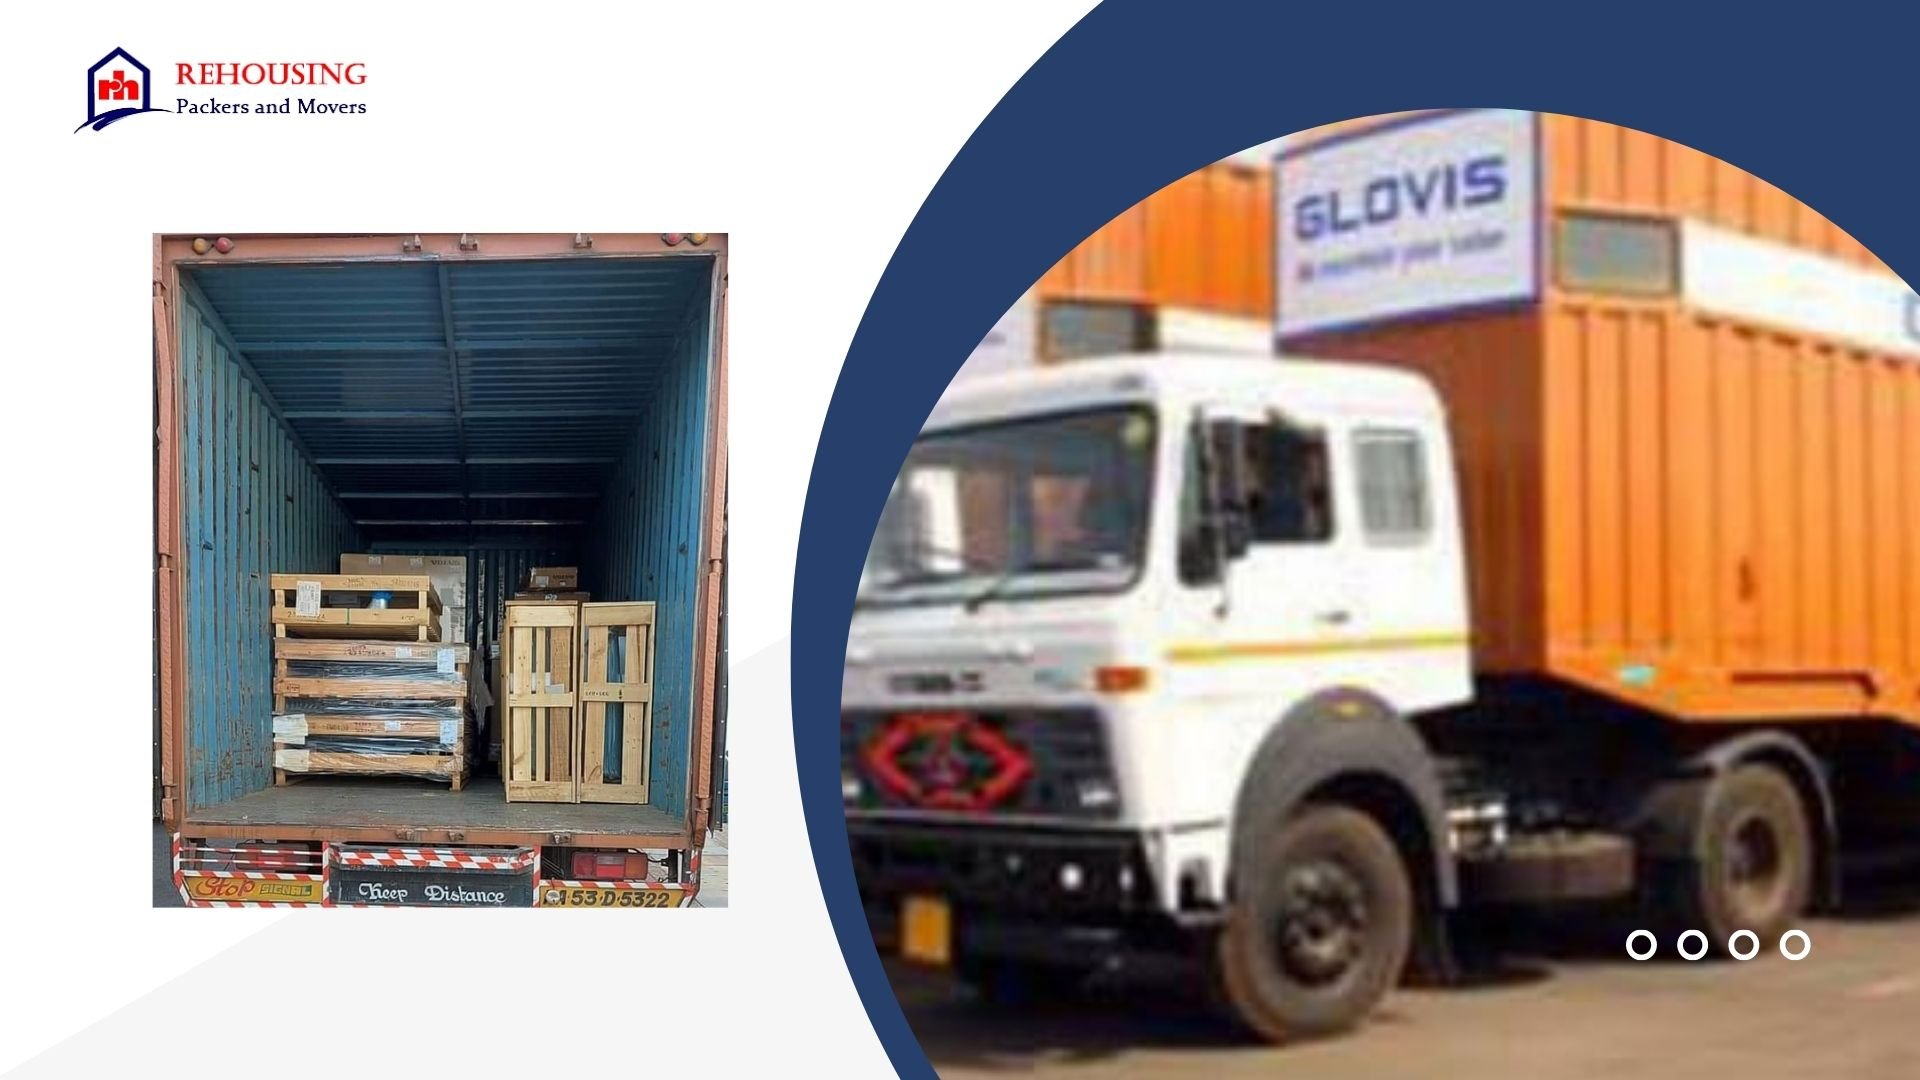 Packers and Movers From Dehradun to Visakhapatnam | Rehousing packers and movers